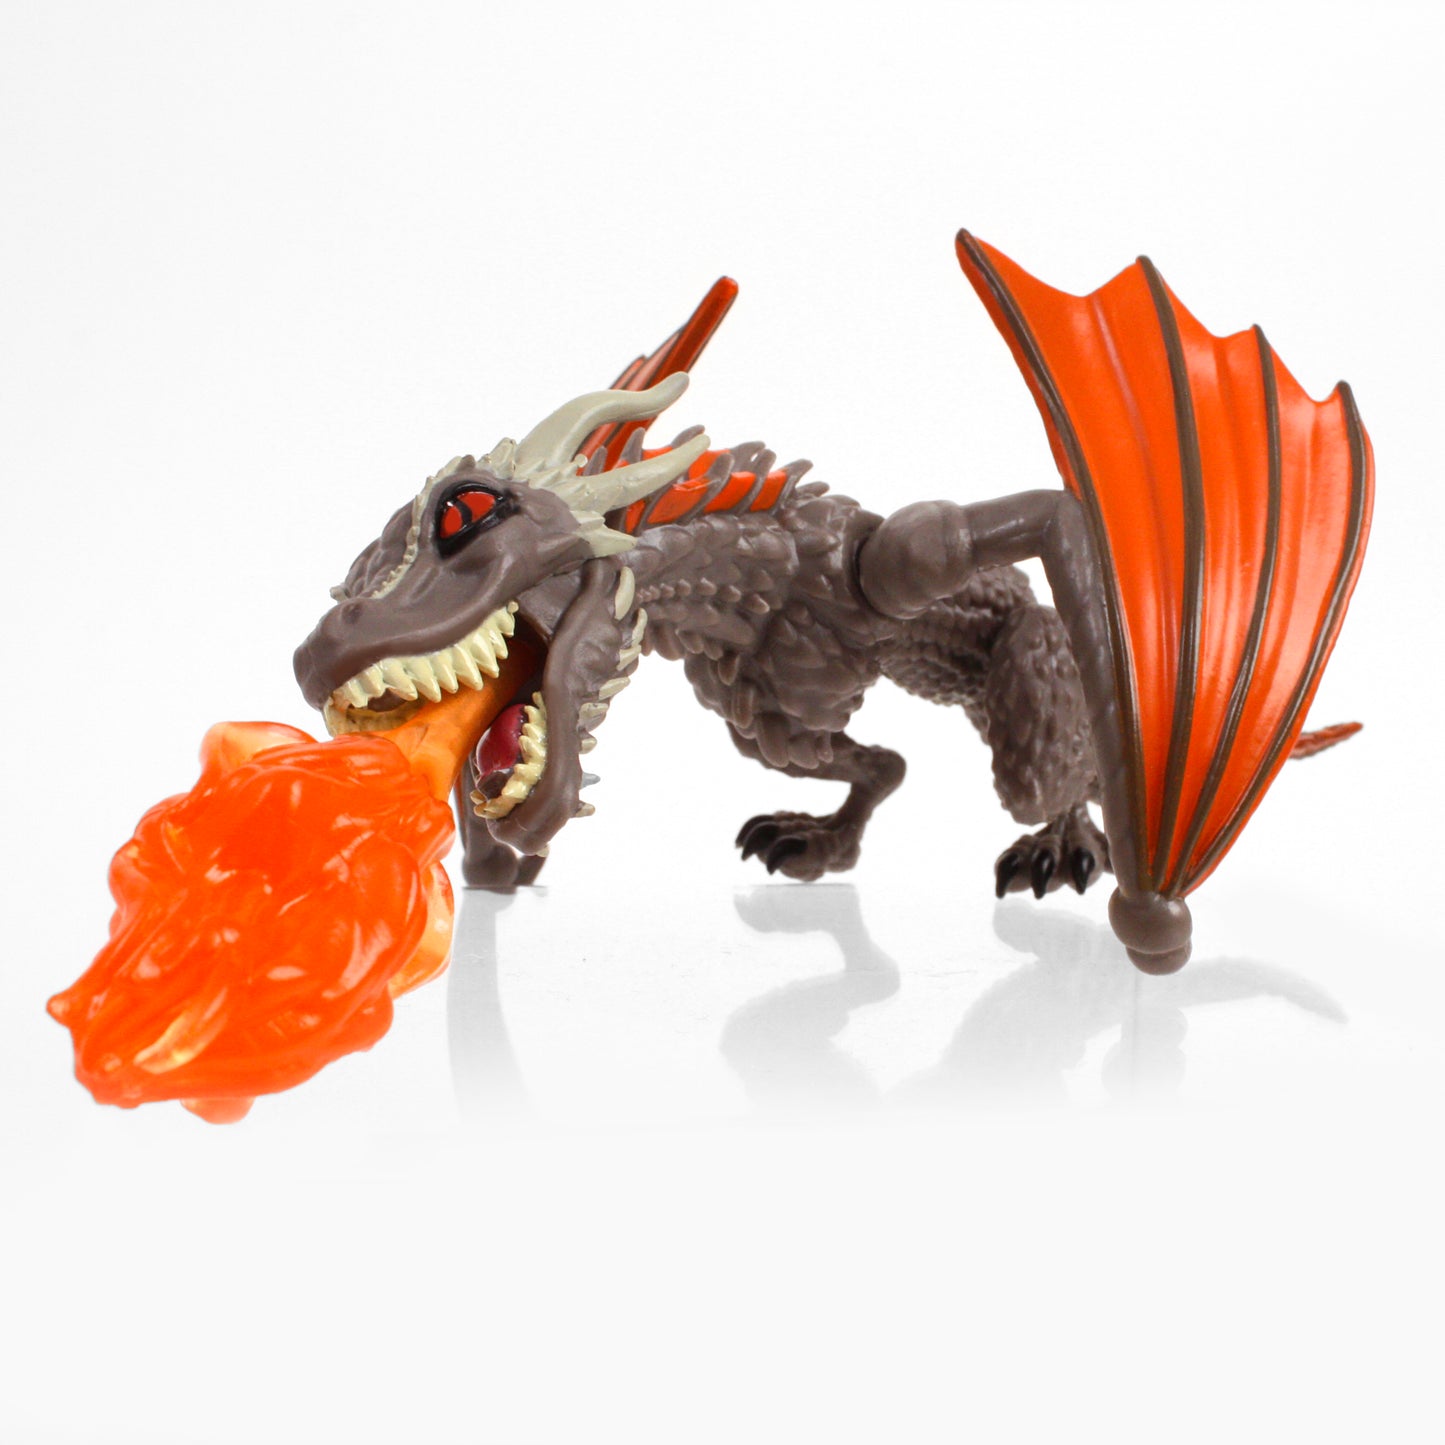 Drogon Action Vinyls from Game of Thrones